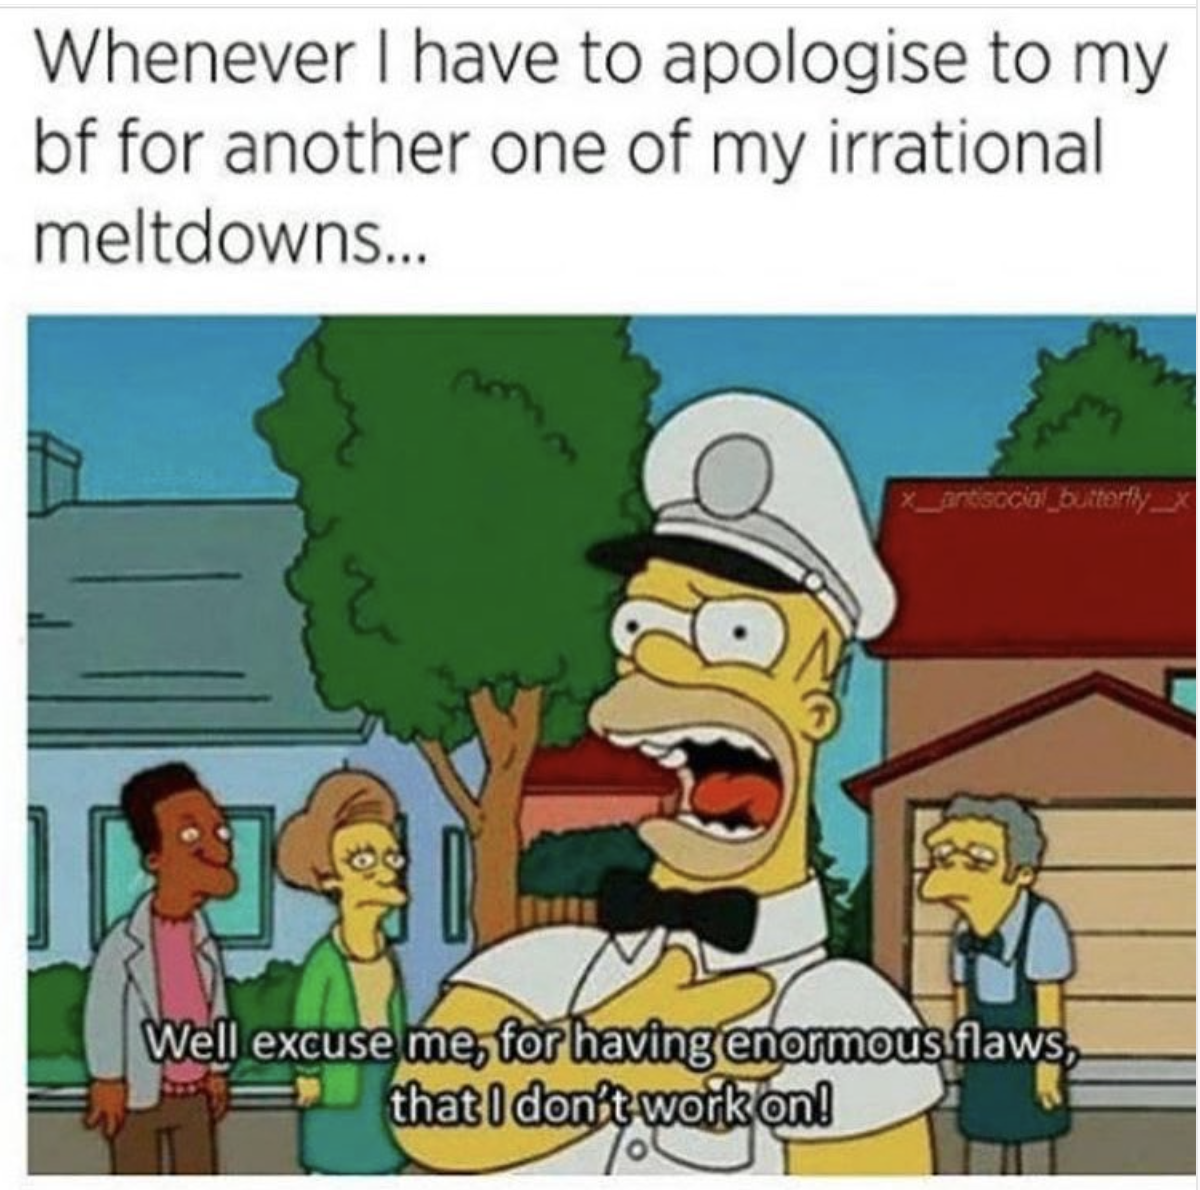 relationship funny memes for boyfriend - Whenever I have to apologise to my bf for another one of my irrational meltdowns... Well excuse me, for having enormous flaws, that I don't work on!